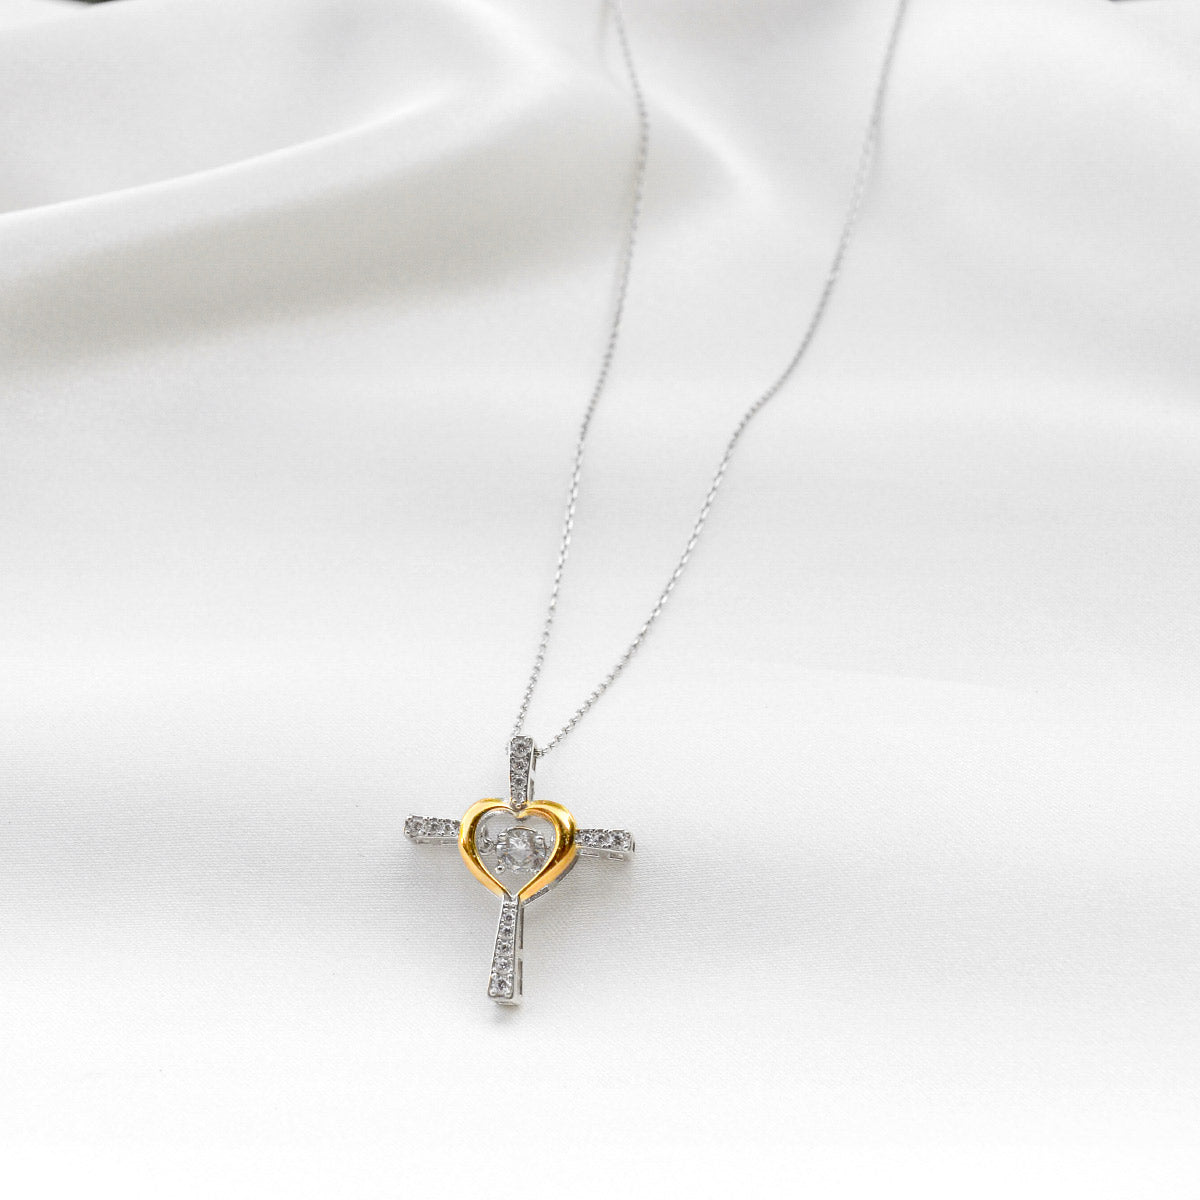 You Are Strong - Dancing Crystal Heart Cross Necklace Gift Set